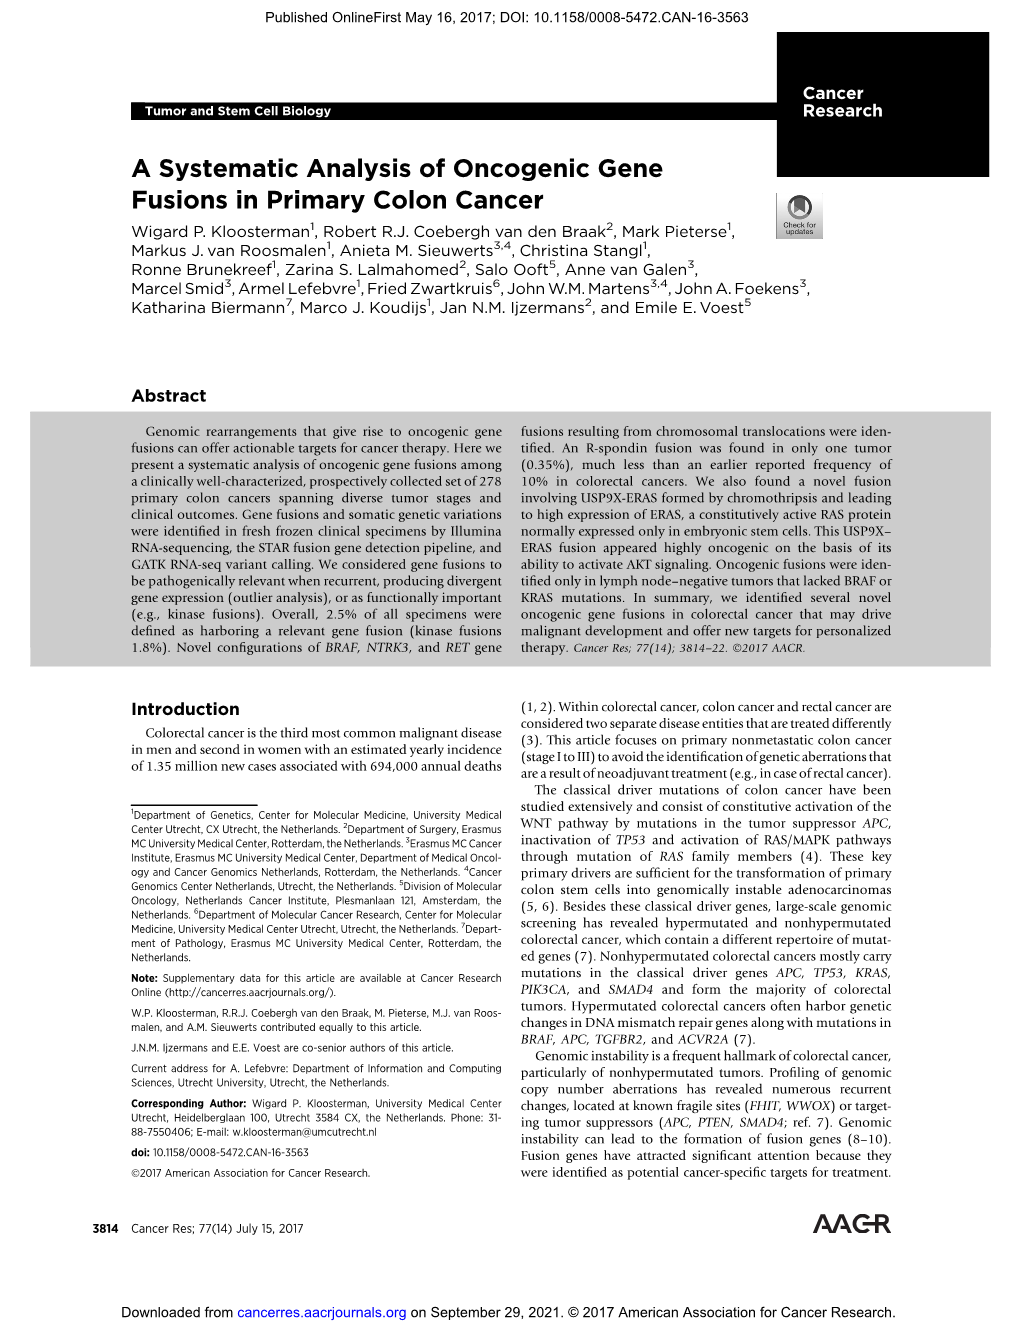 A Systematic Analysis of Oncogenic Gene Fusions in Primary Colon Cancer Wigard P